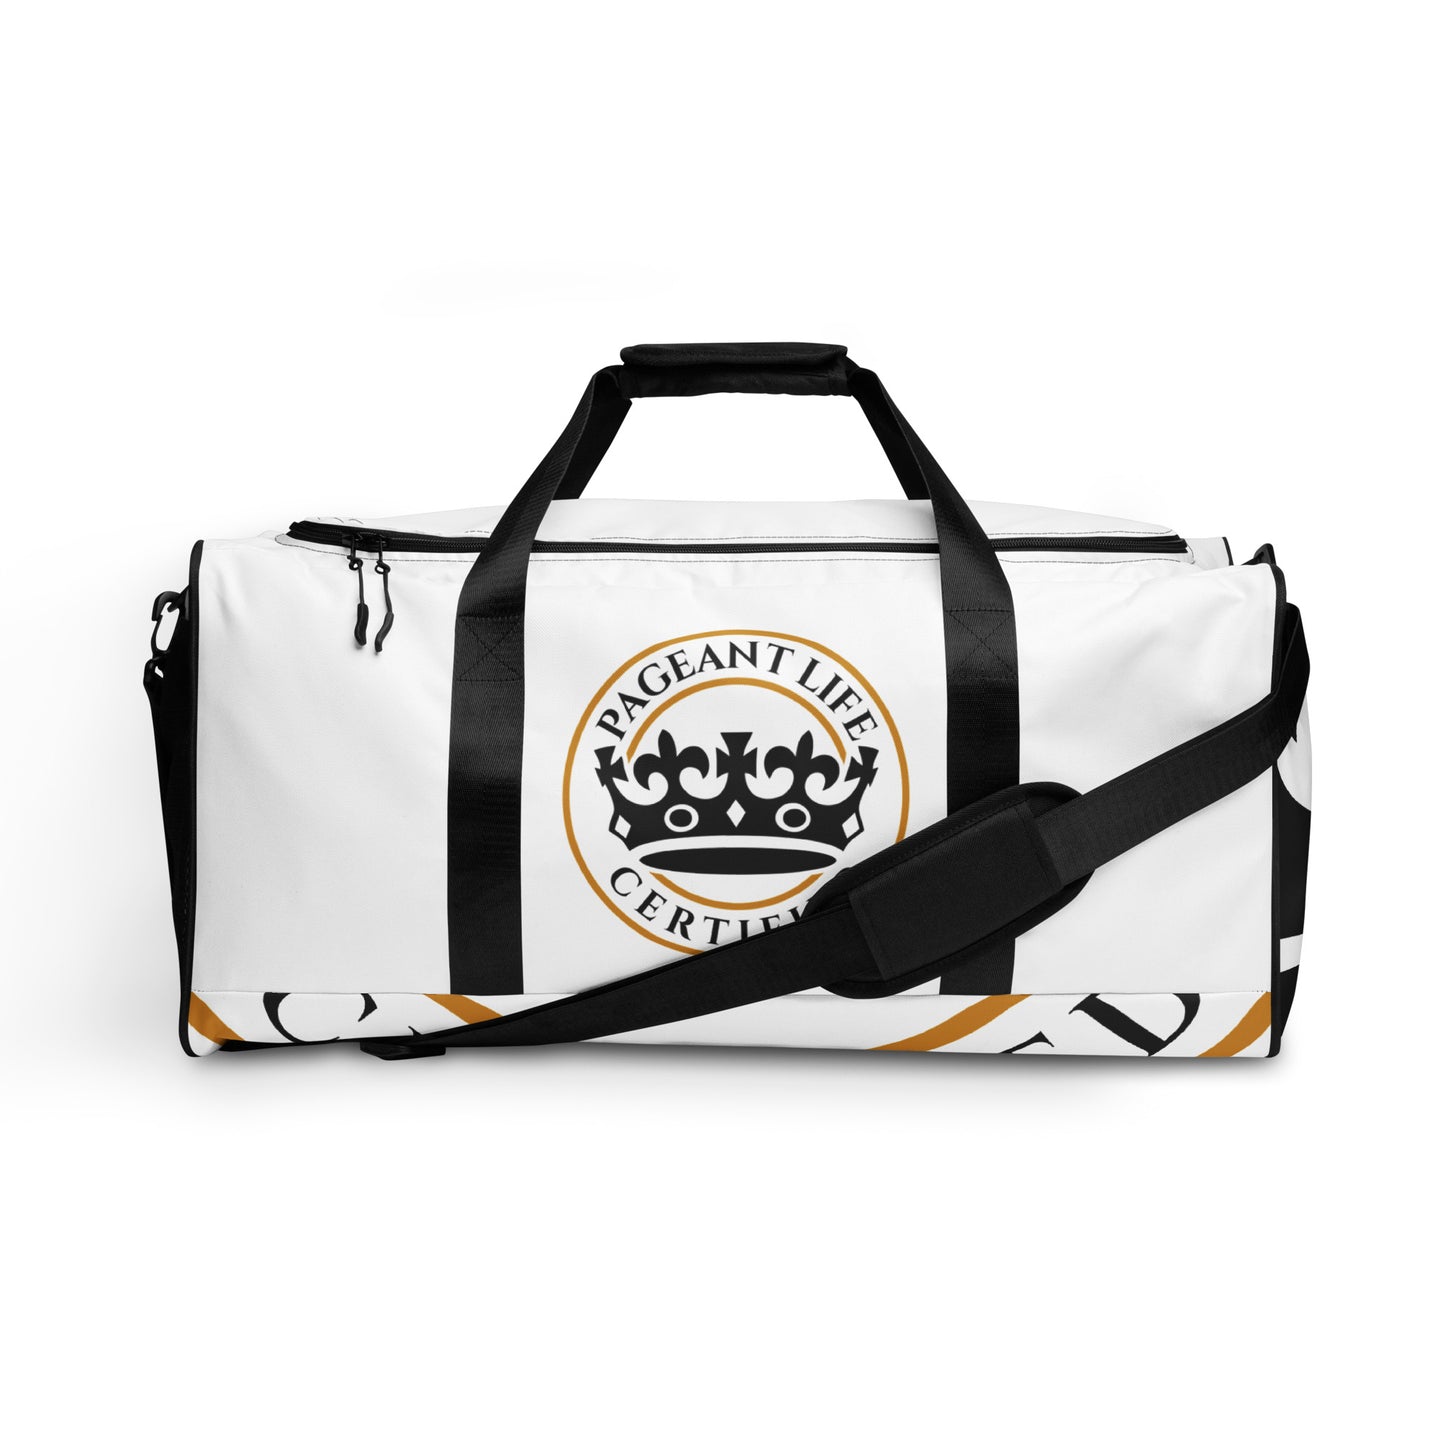 Black and Gold/ White Pageant Life Certified Duffle bag